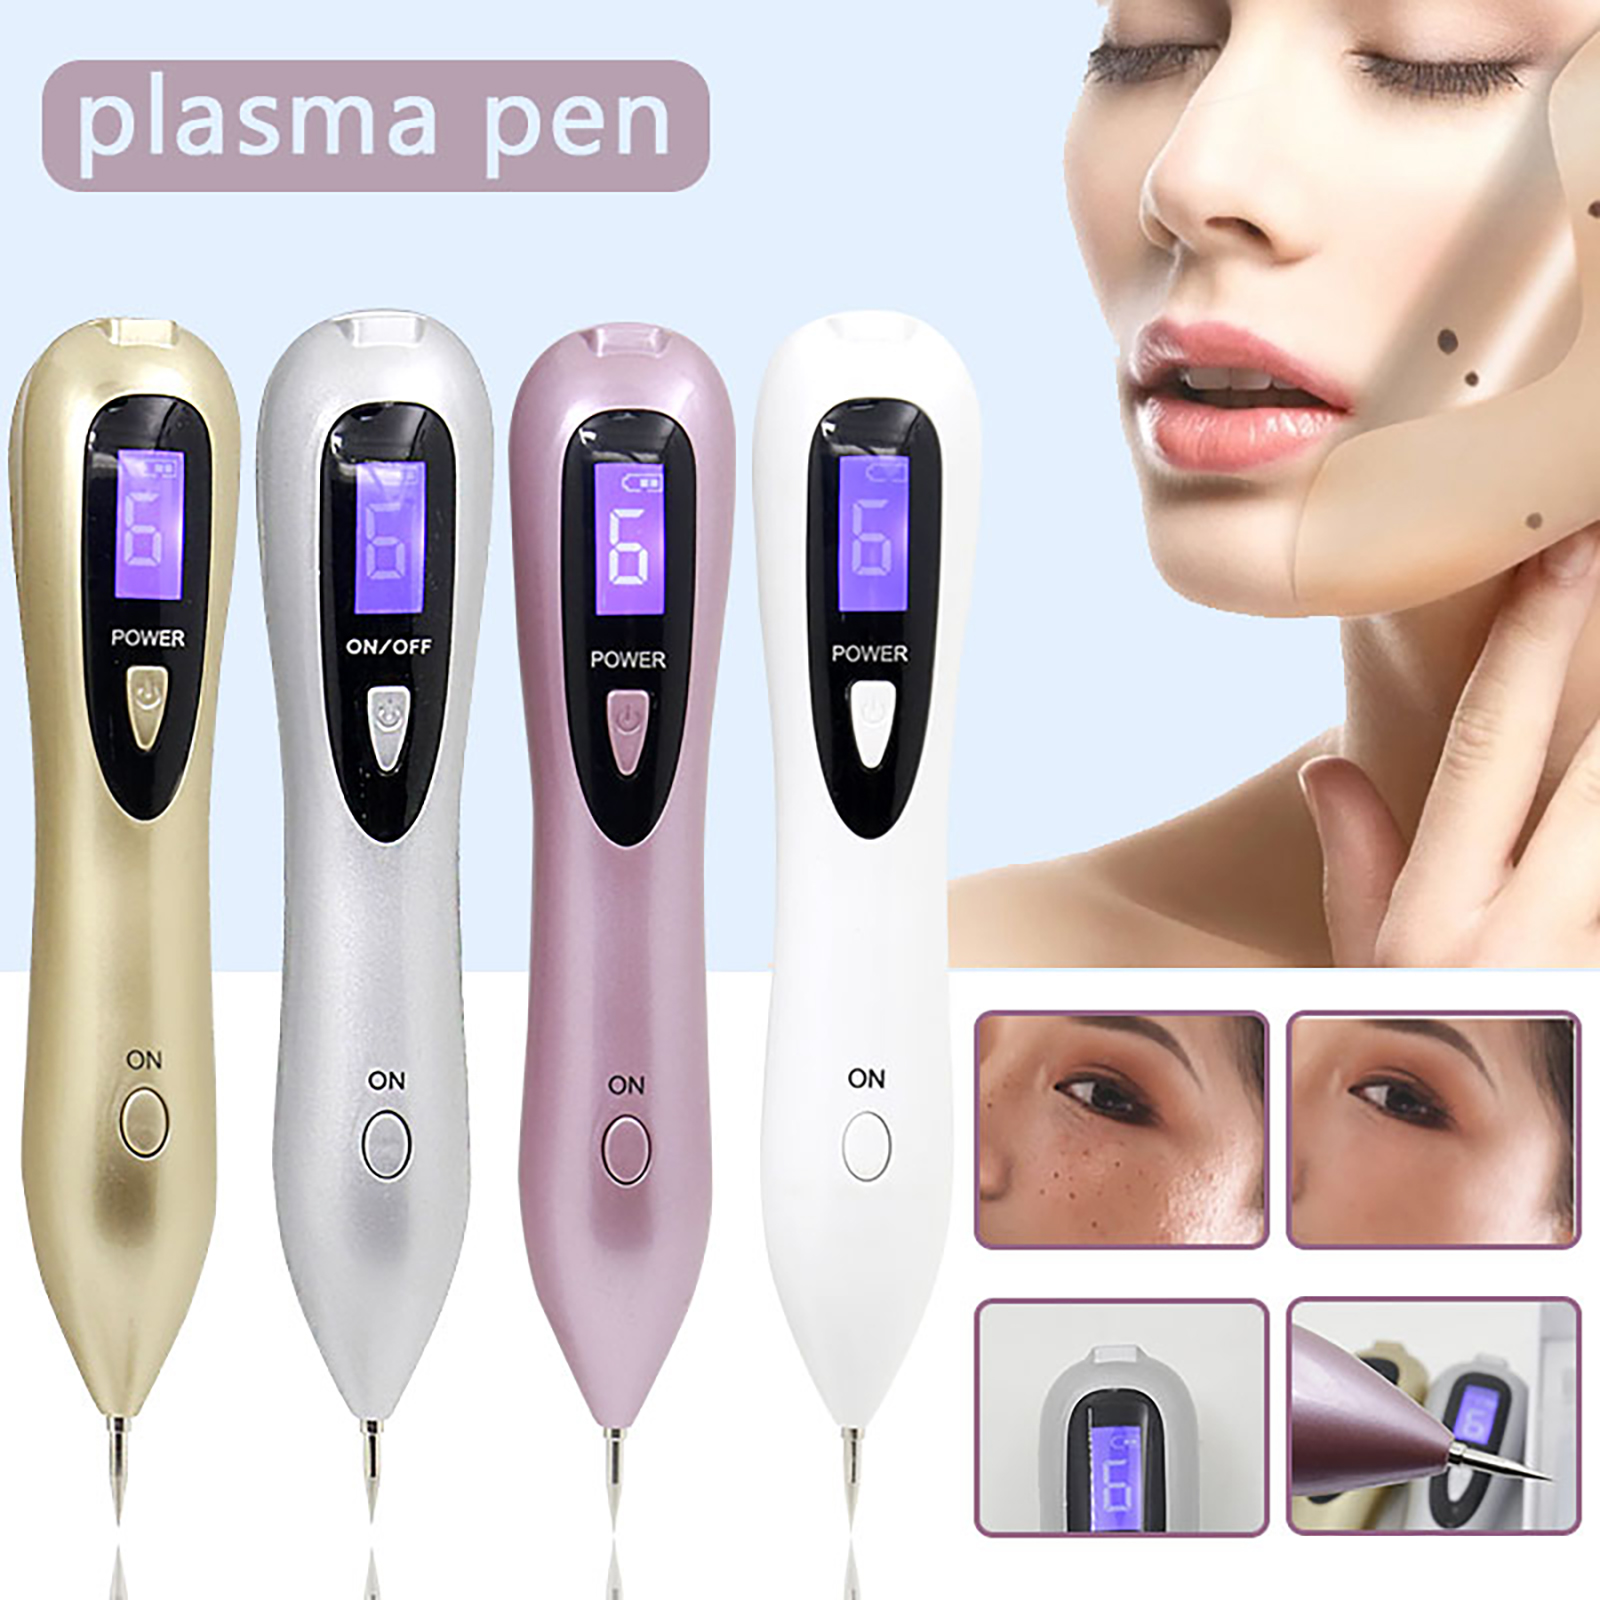 Handheld Picosecond Pen II Blue Laser Therapy For Scar Spot Tattoo Removal  Kits | eBay